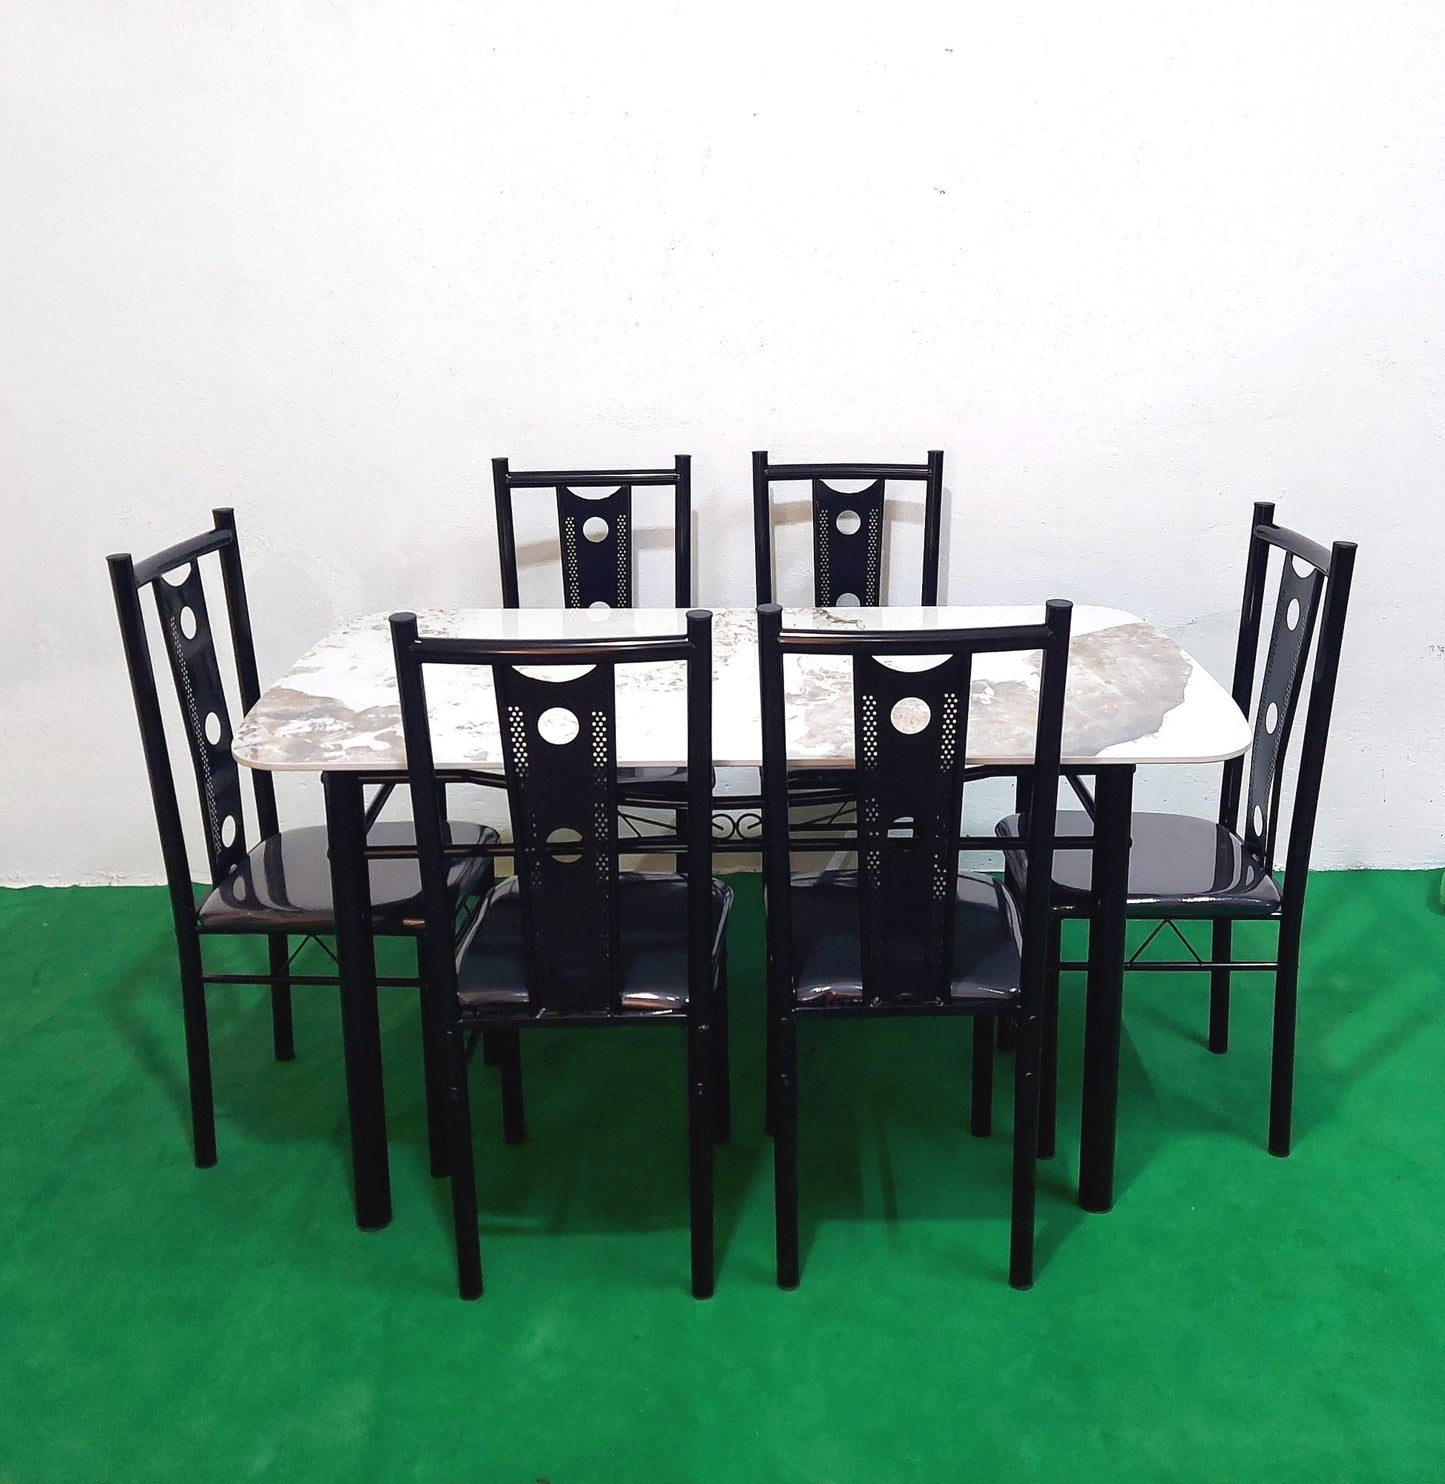 Bowzar 6 Seater Dining Table Set With Ceramic Top Cushioned Chair